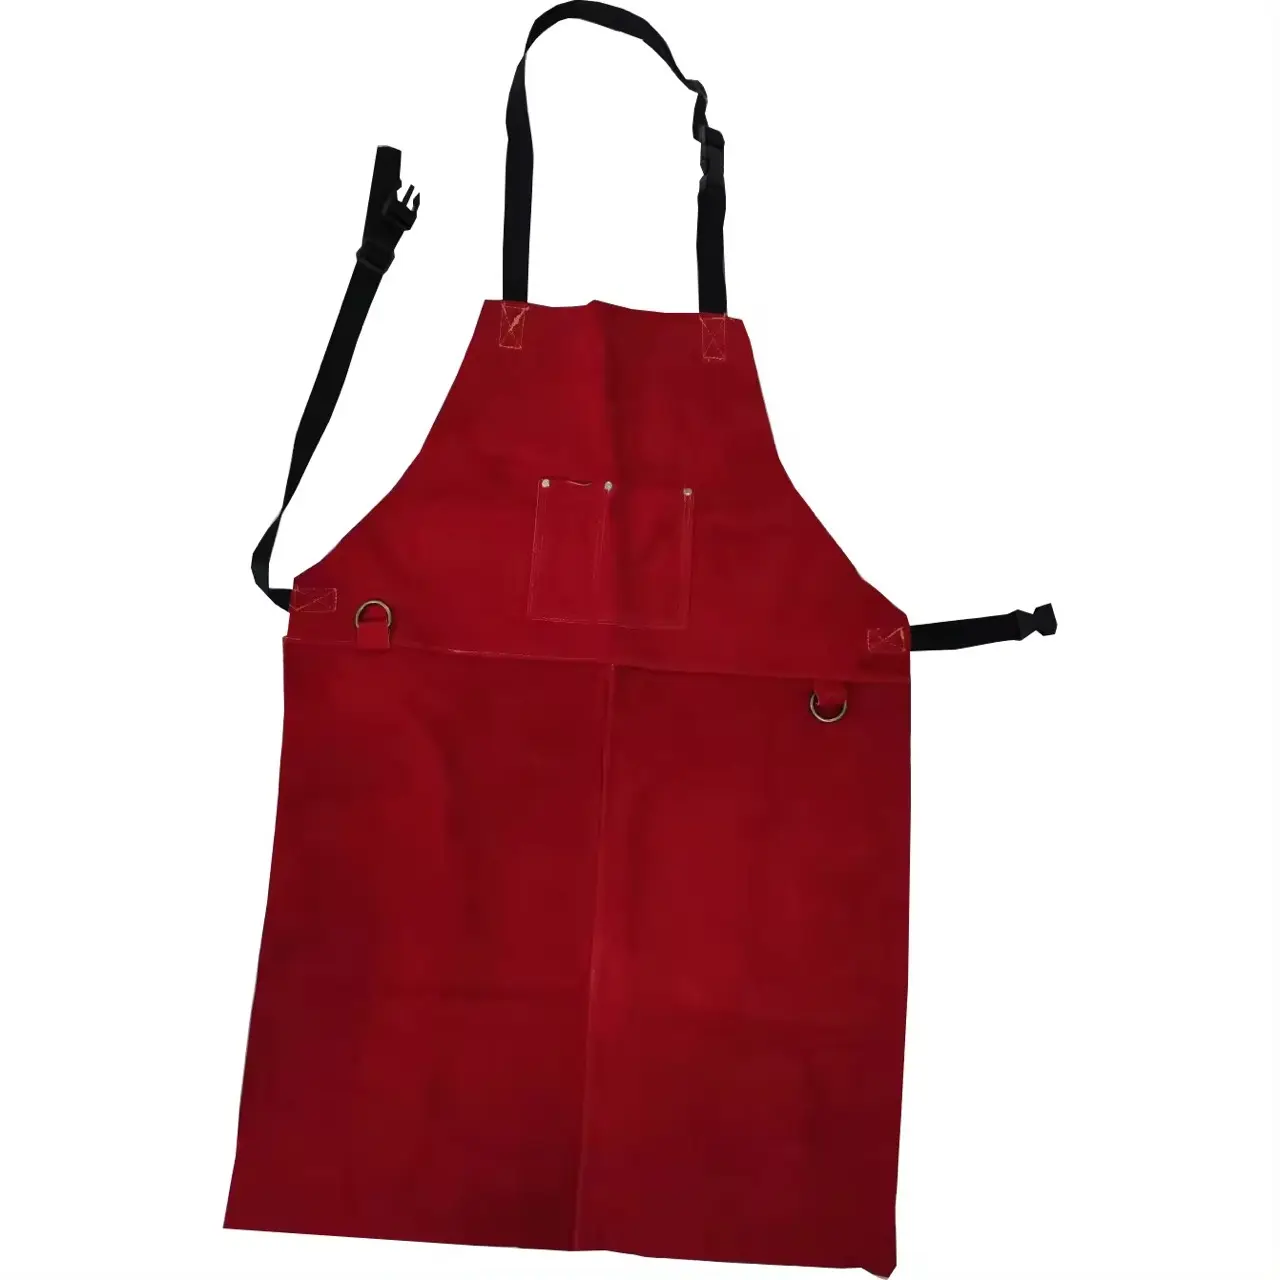 Industrial Safety Apron Welding Anti Spark Heat Fire Resistant Leather Welders Work Aprons